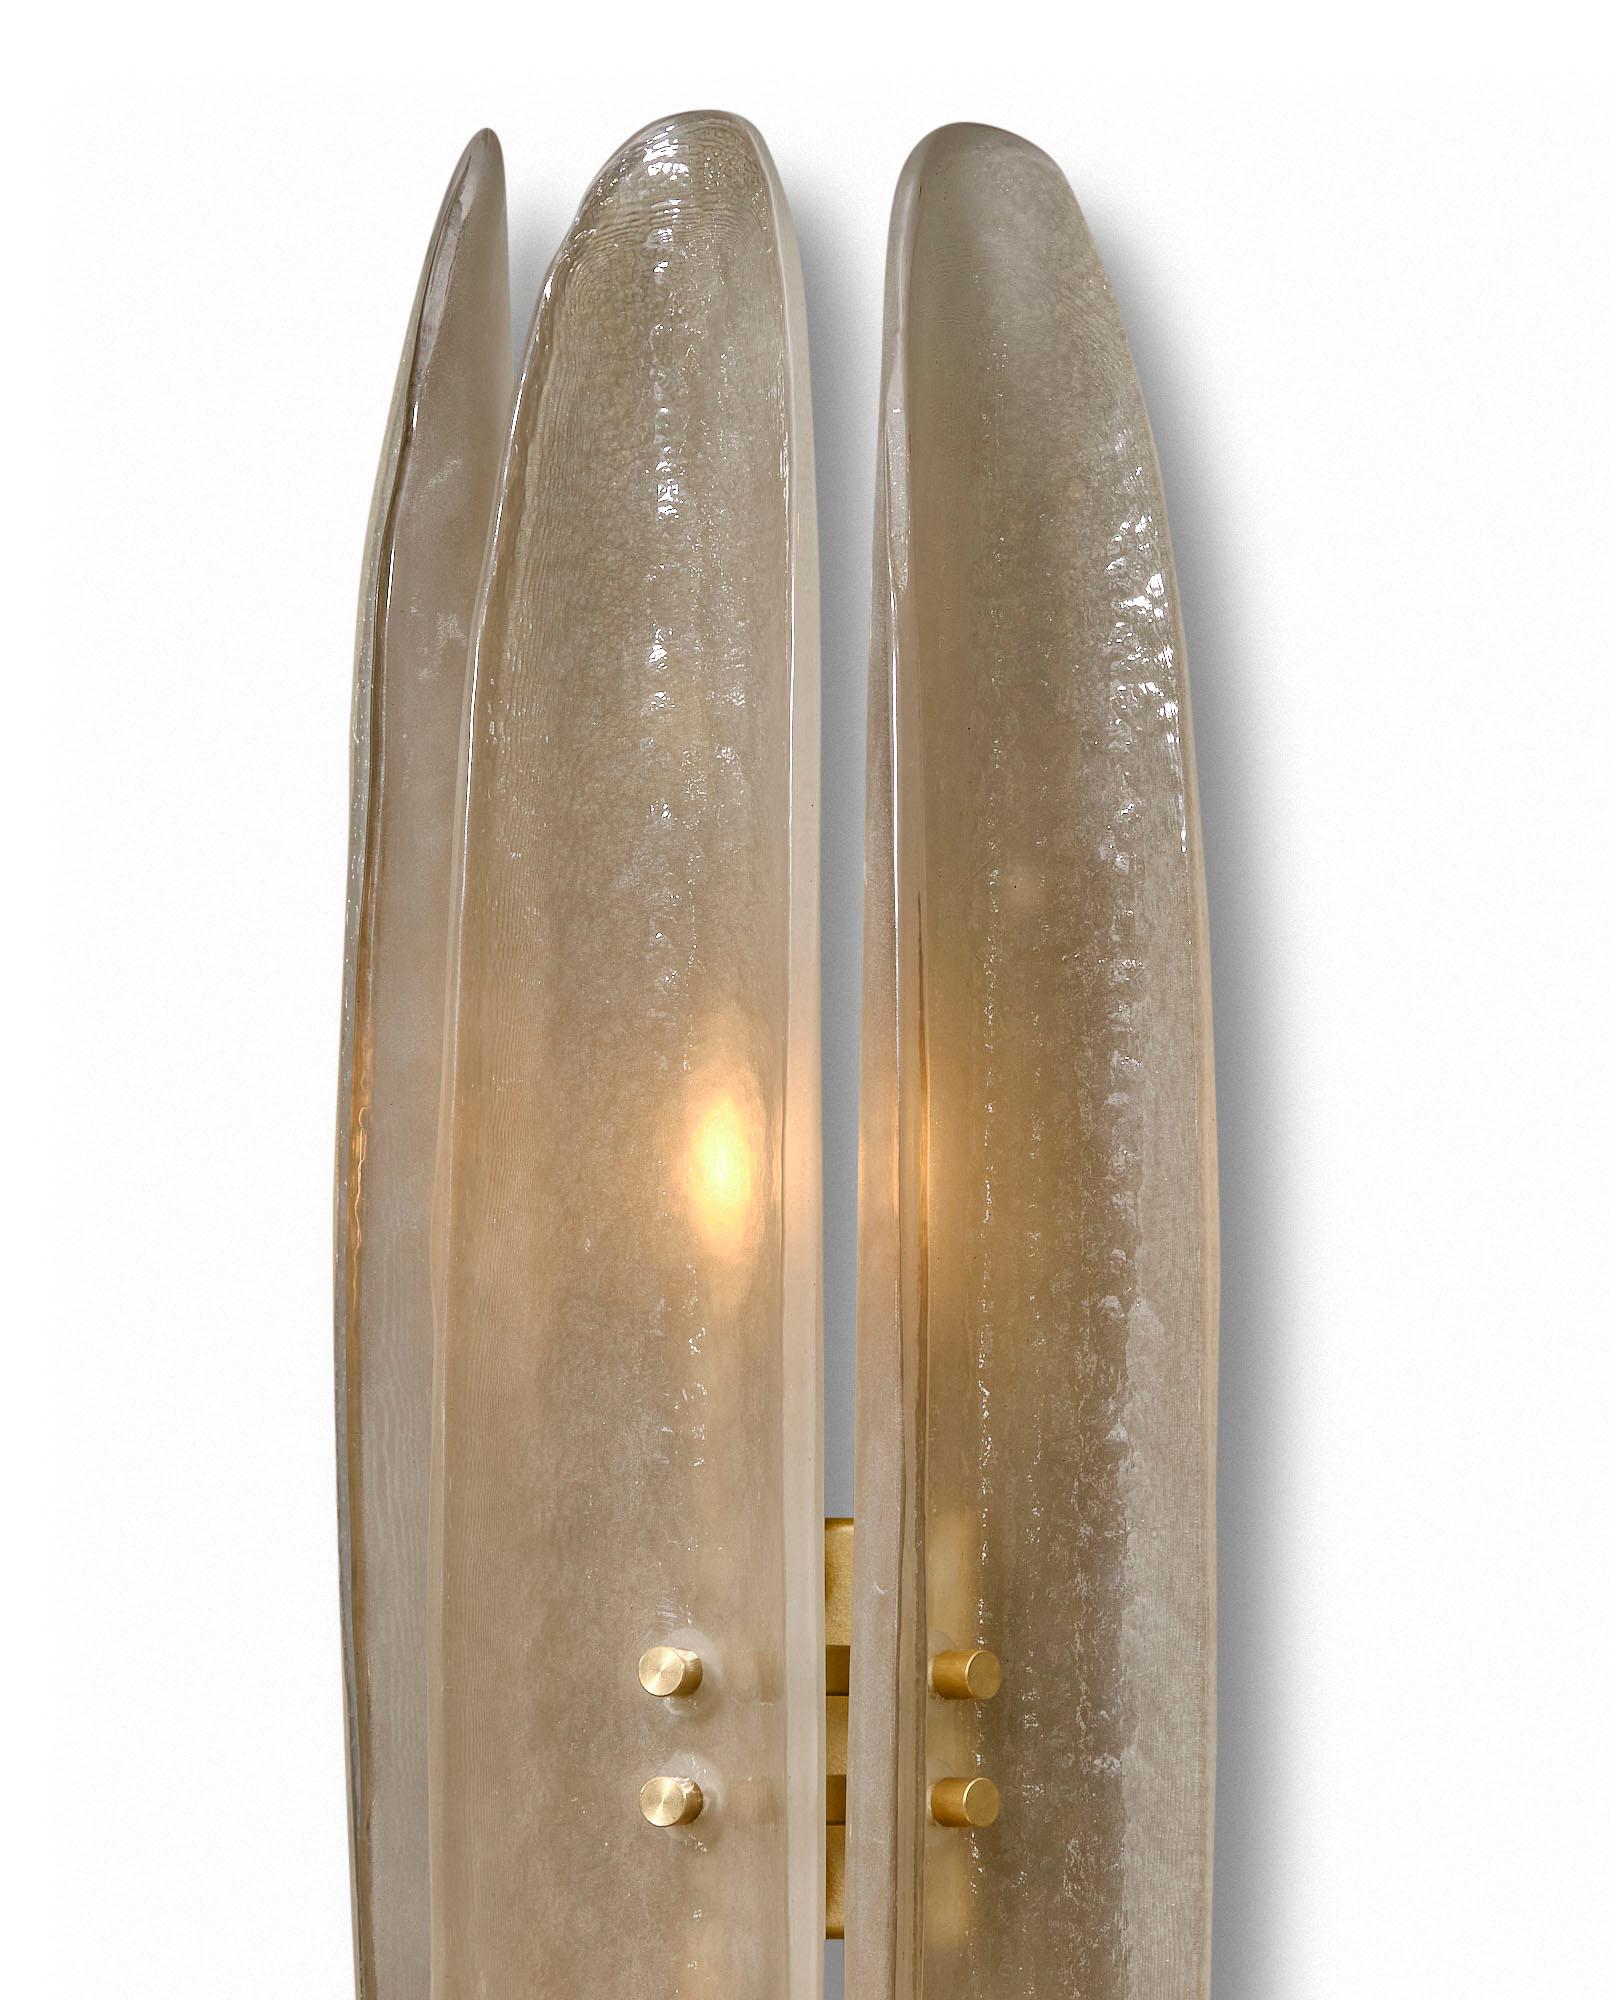 Pair of Murano glass paneled sconces; each crafted with three curved panels of hand-blown smoked glass on a brass frame. We love the modern style and hand-crafted quality of these sconces. They have been newly wired to fit US standards.

This pair